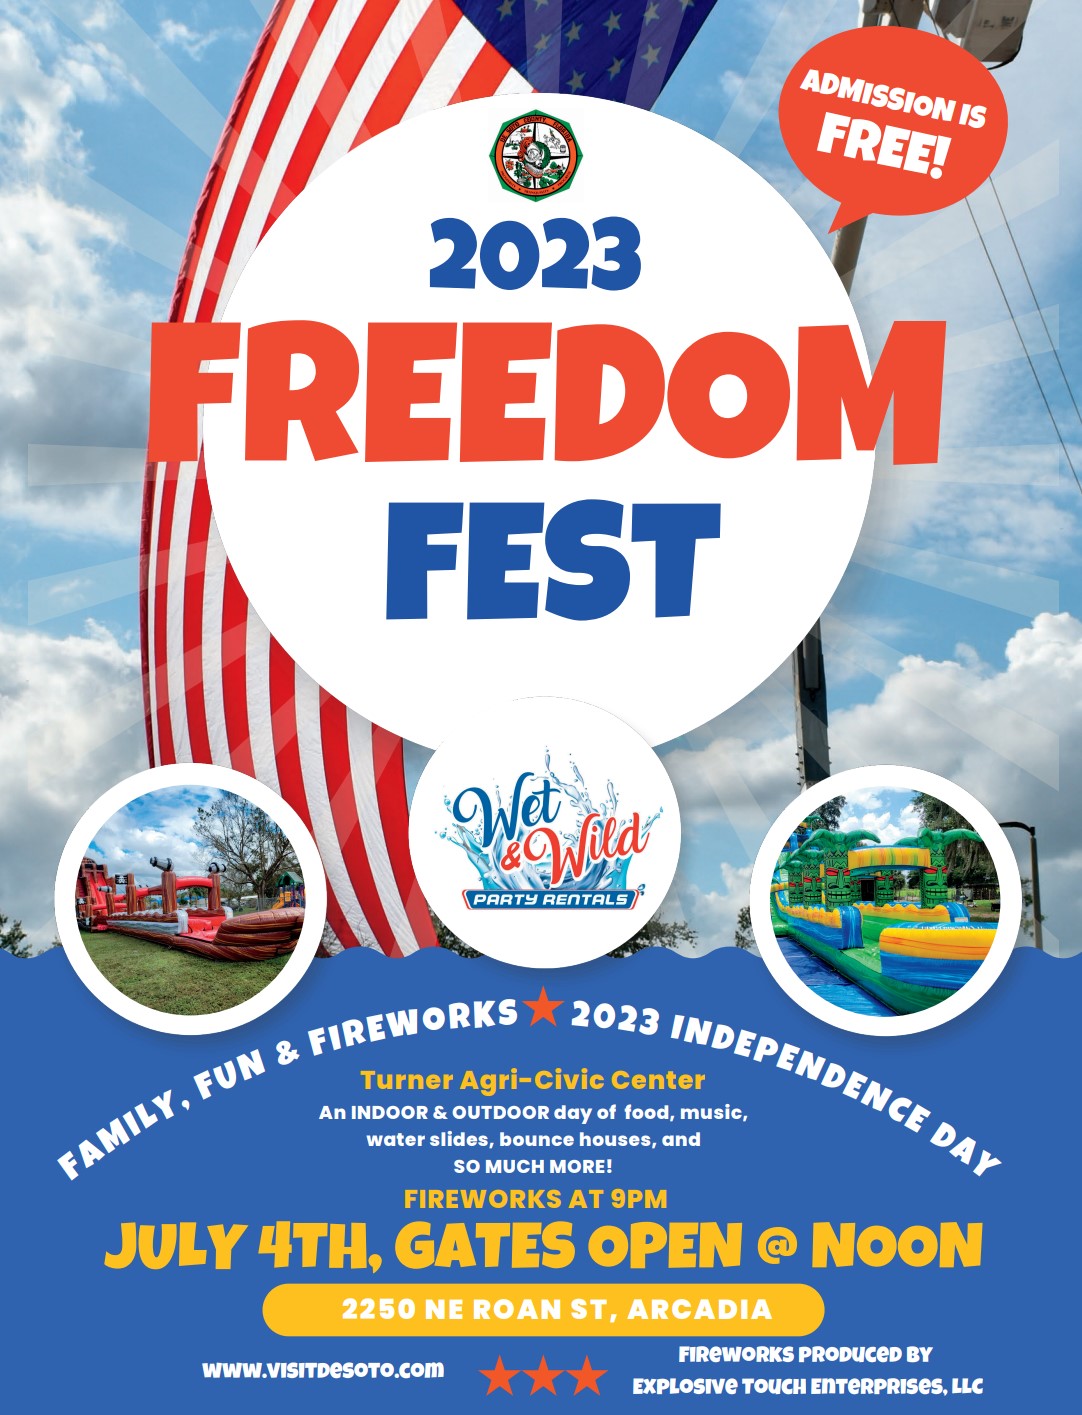 DeSoto County announces 4th of July Freedom Fest